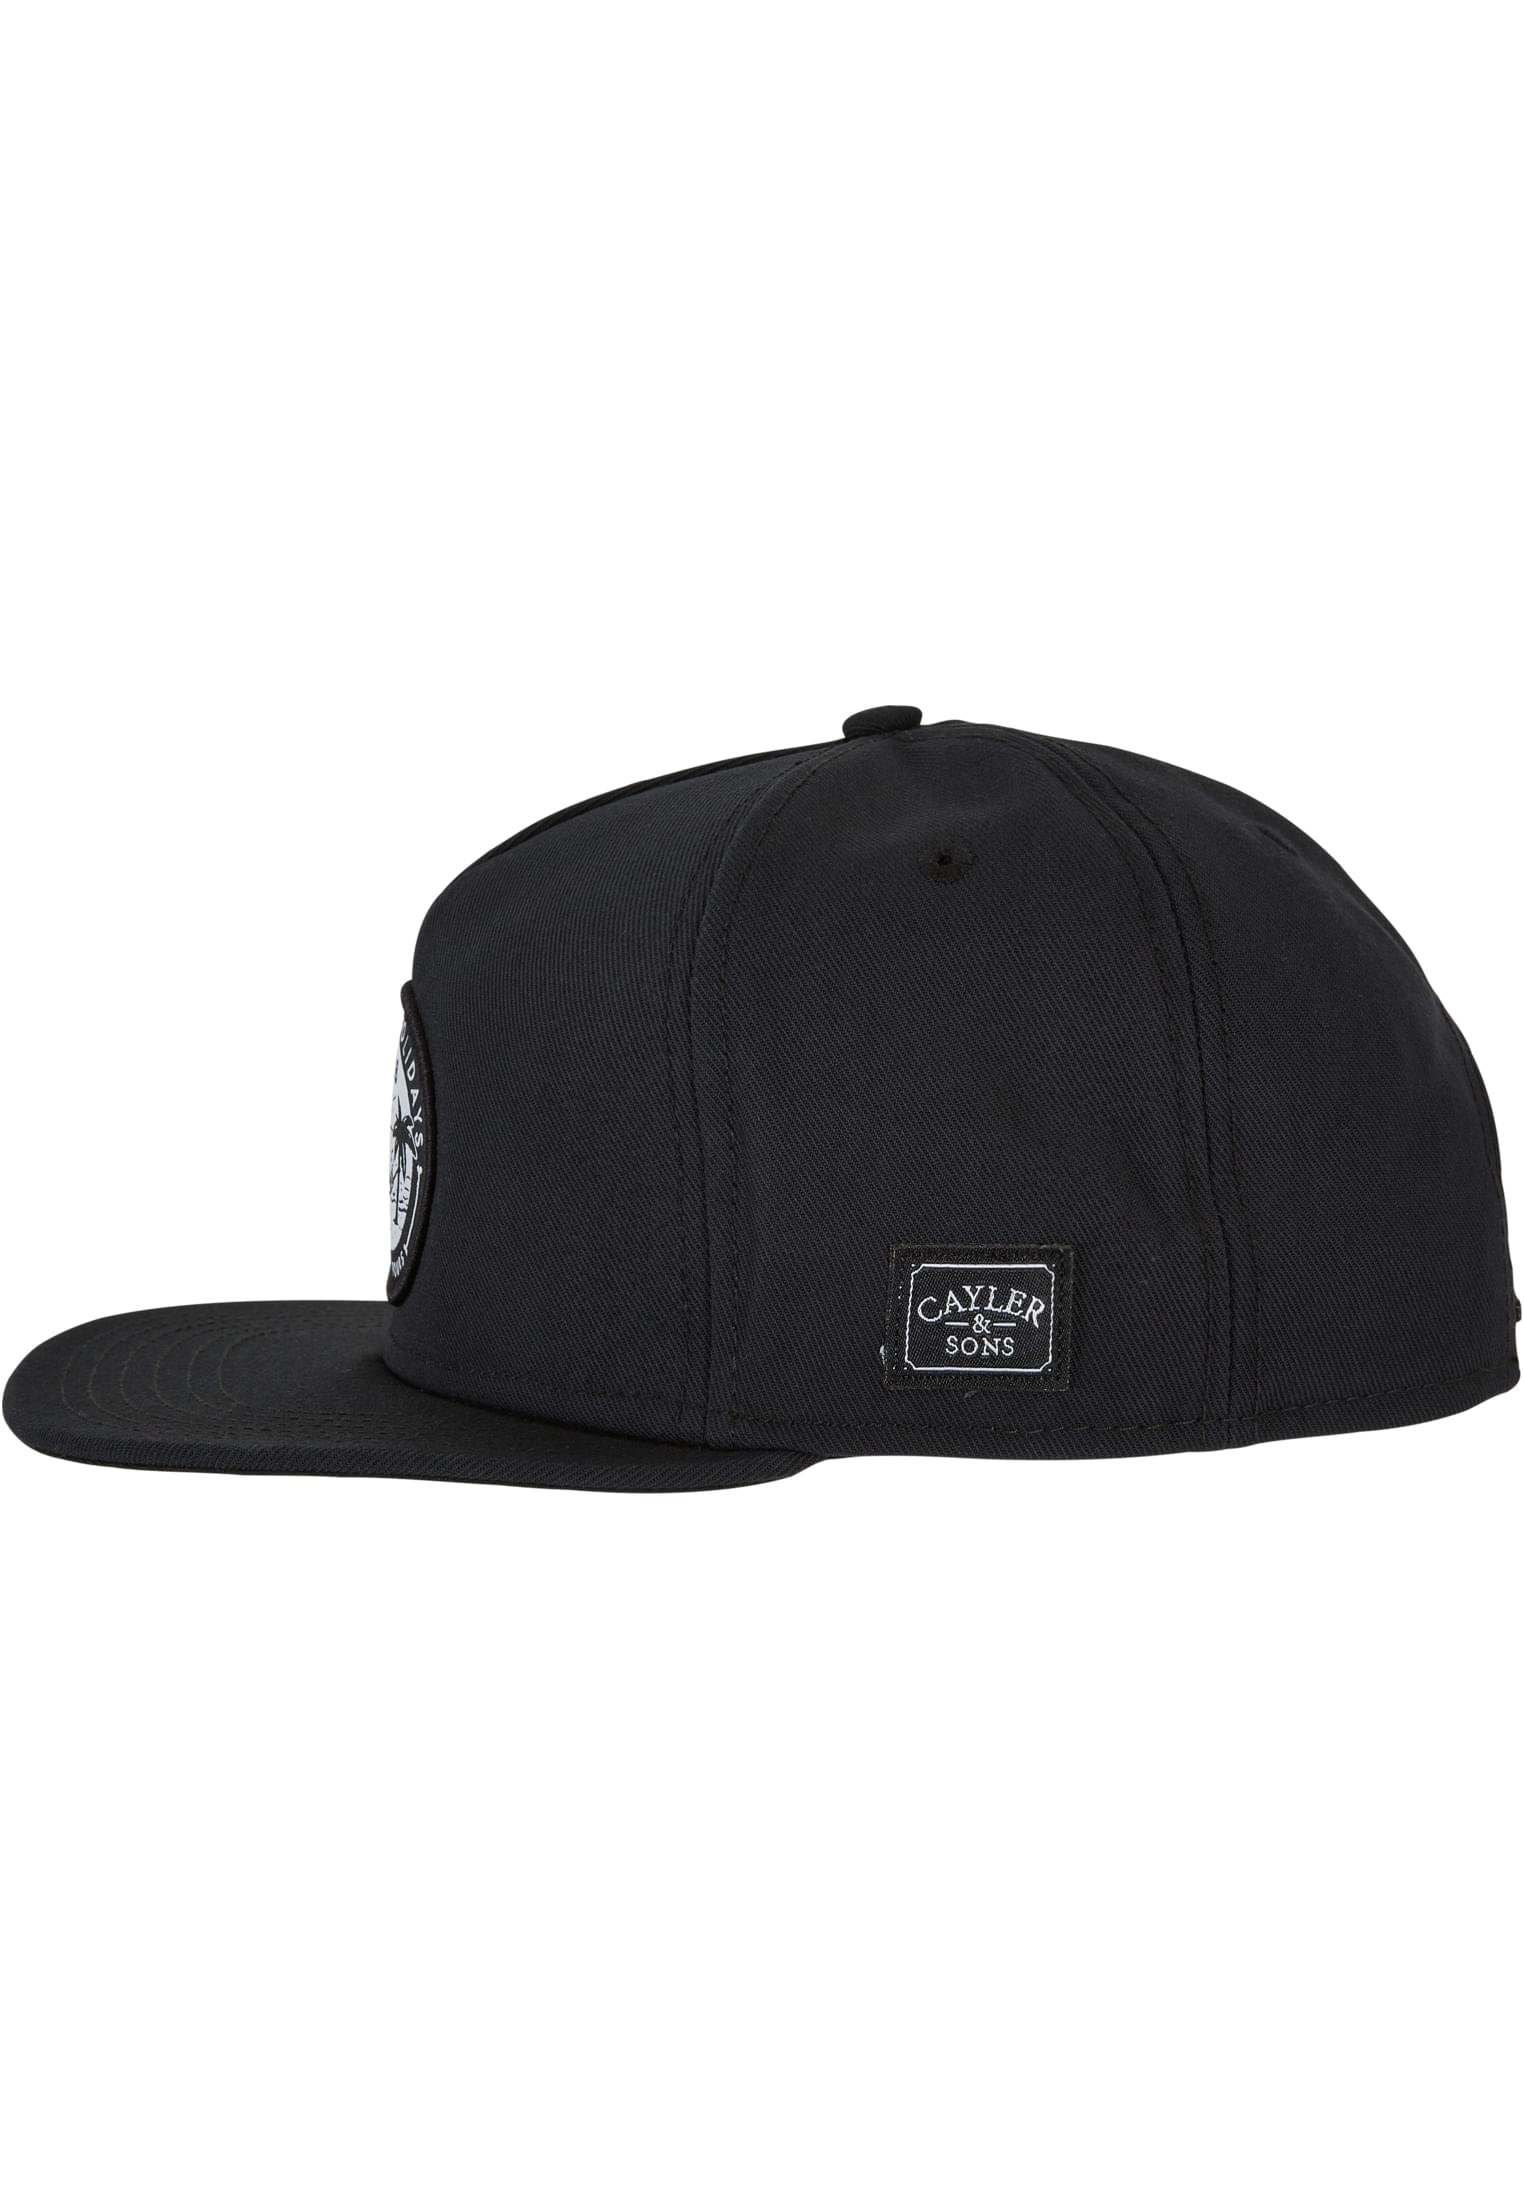 Holidays Strong P Cap black one size